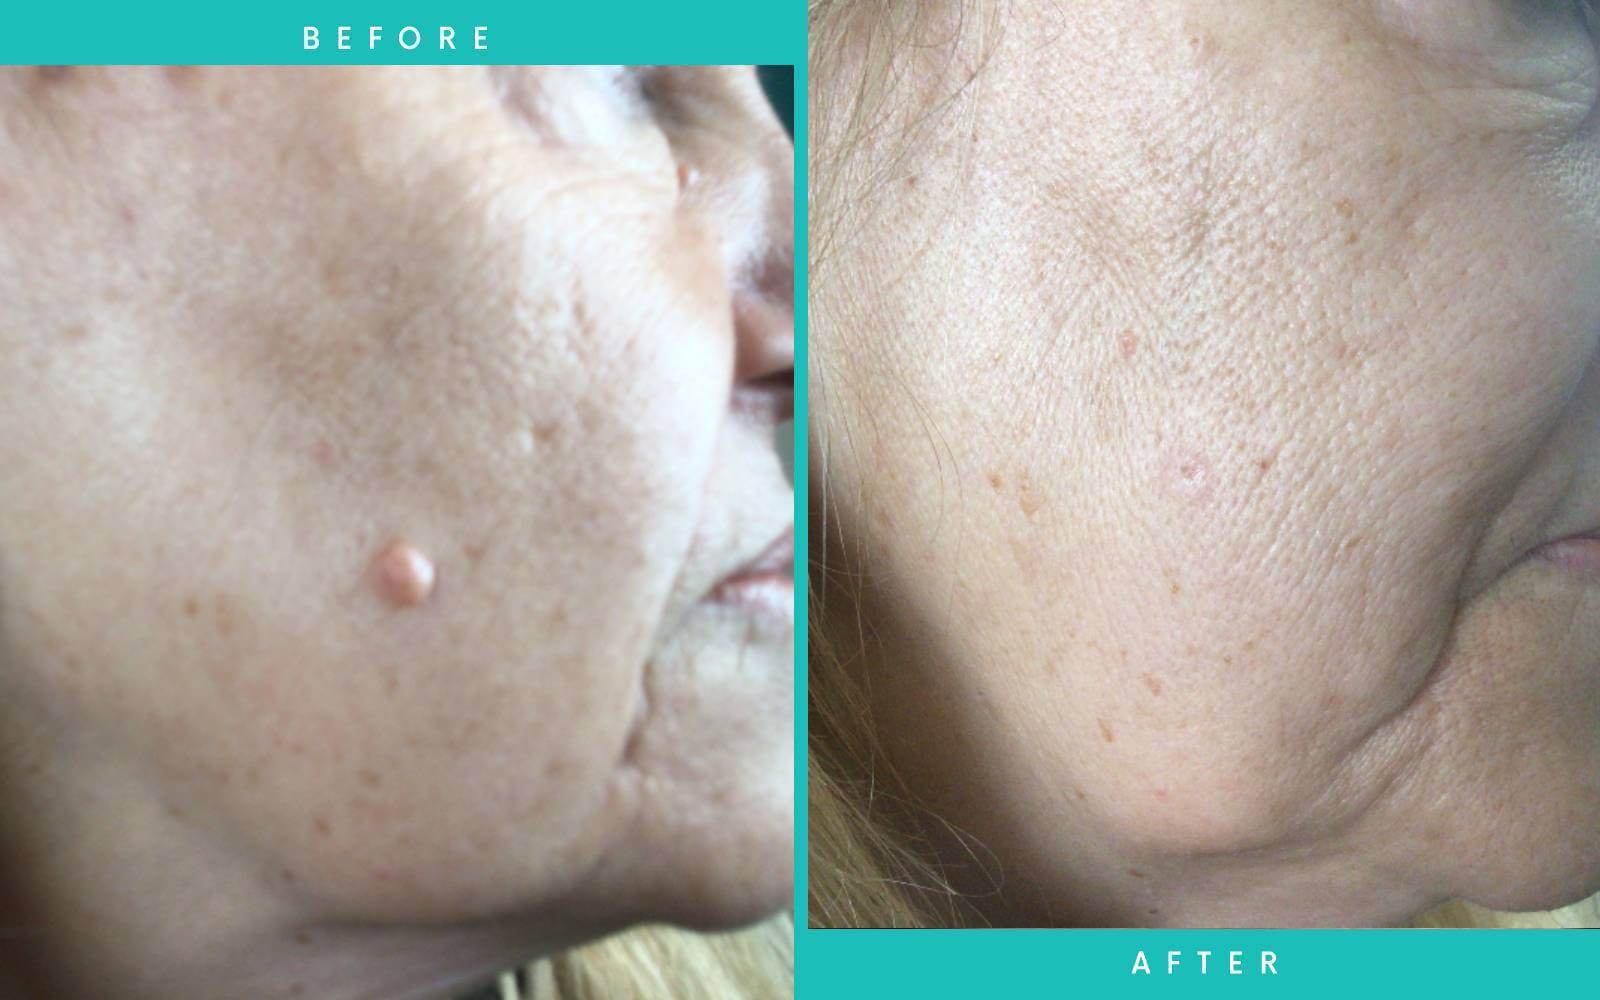 PlexR Mole Removal Before and After